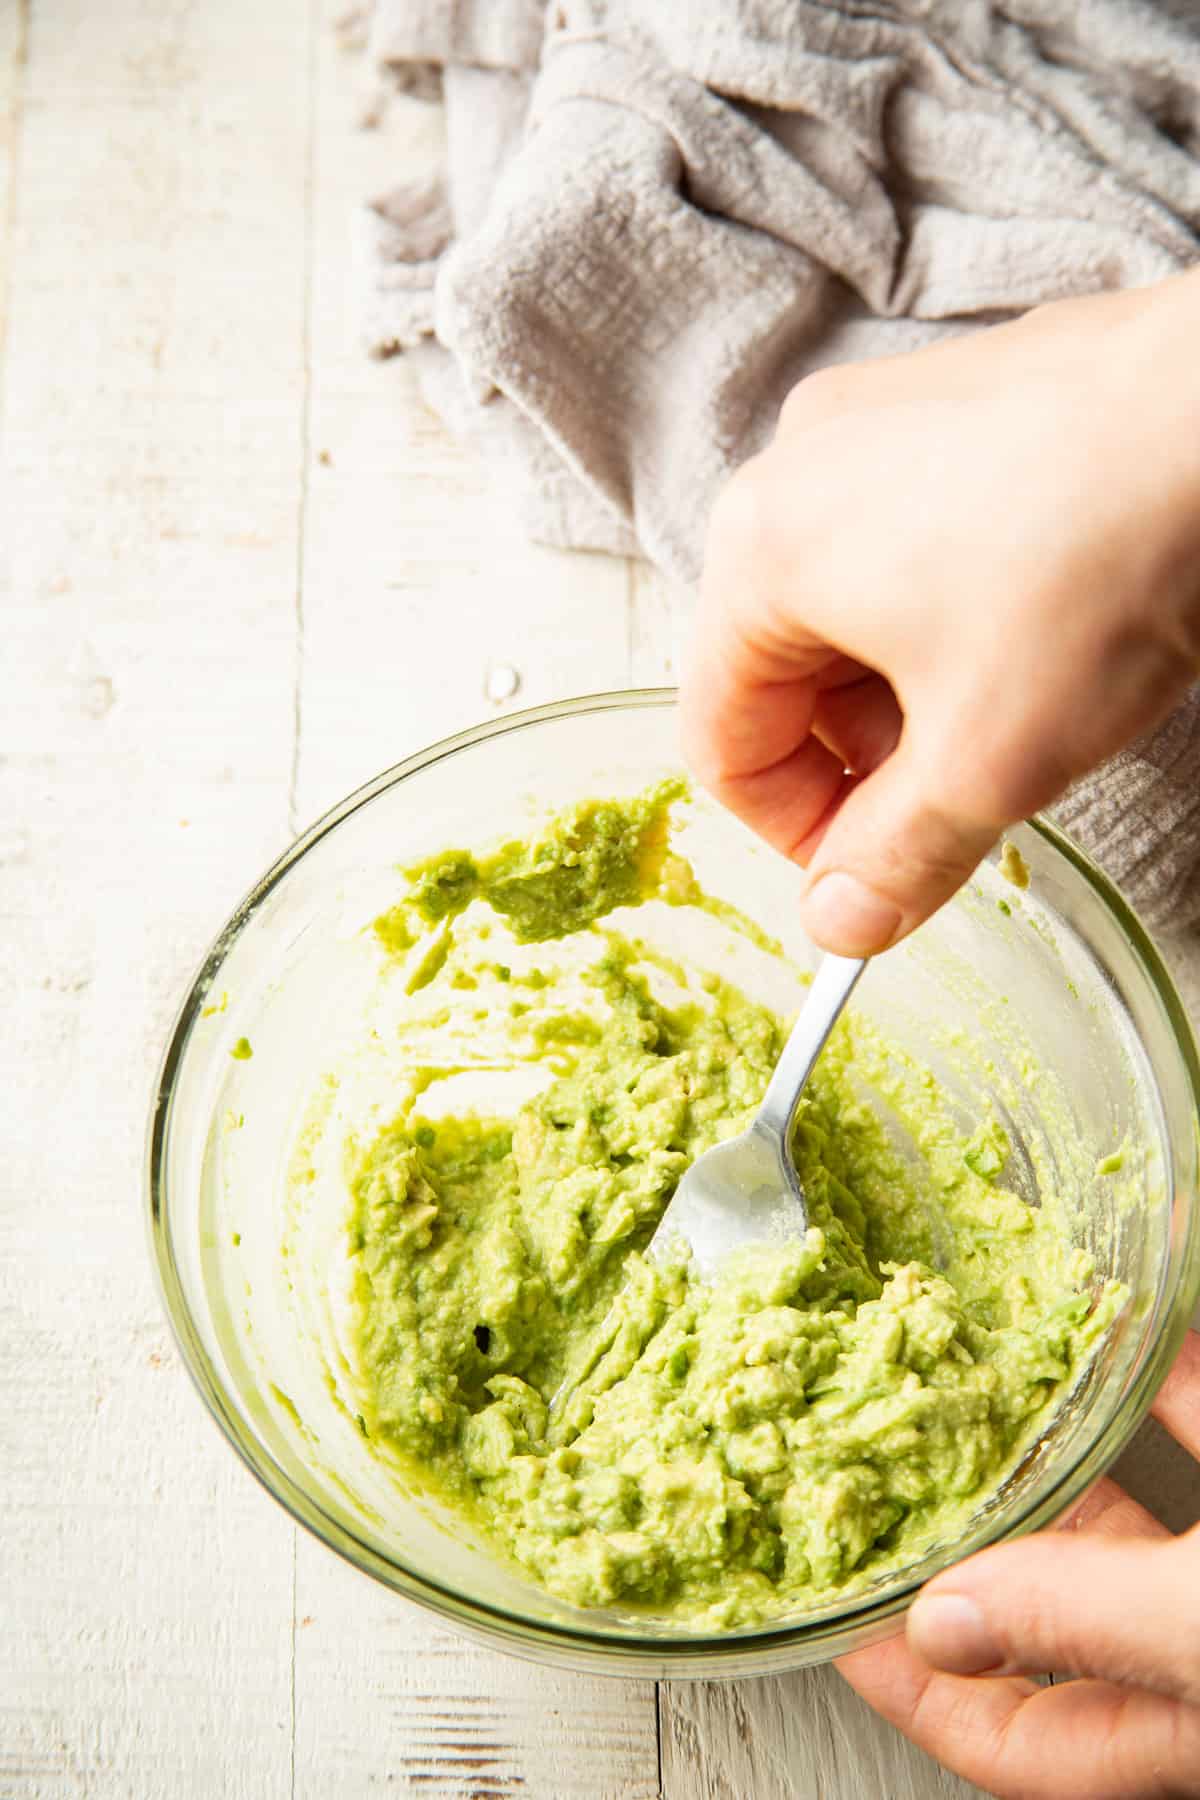 Hand stirring avocado mash together in a glass bowl.